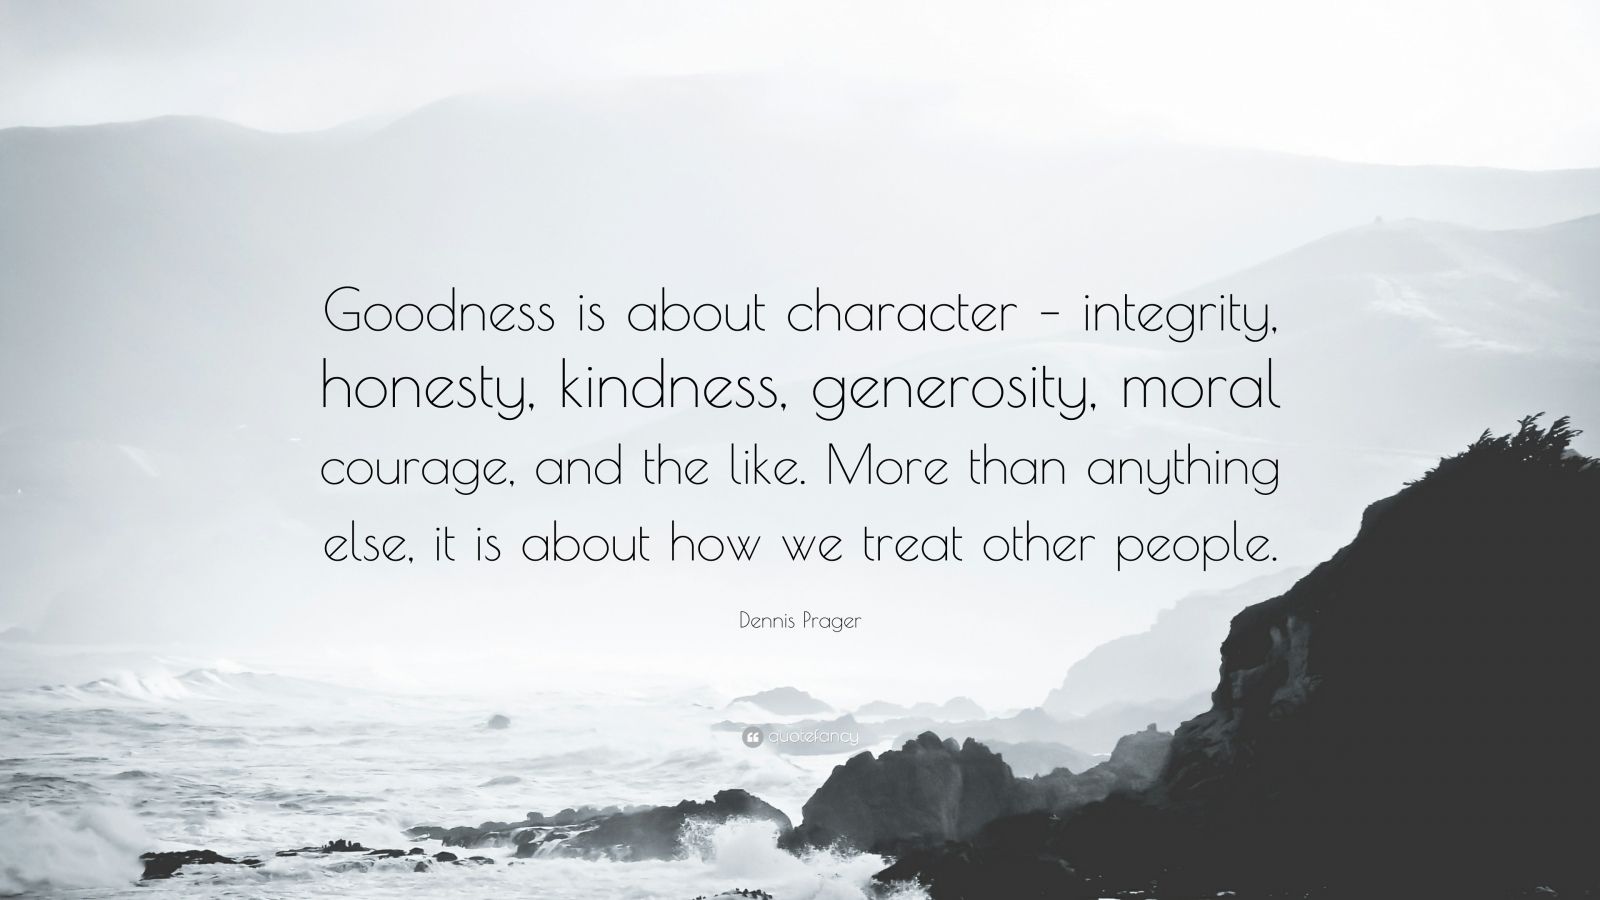 Integrity & Moral Courage